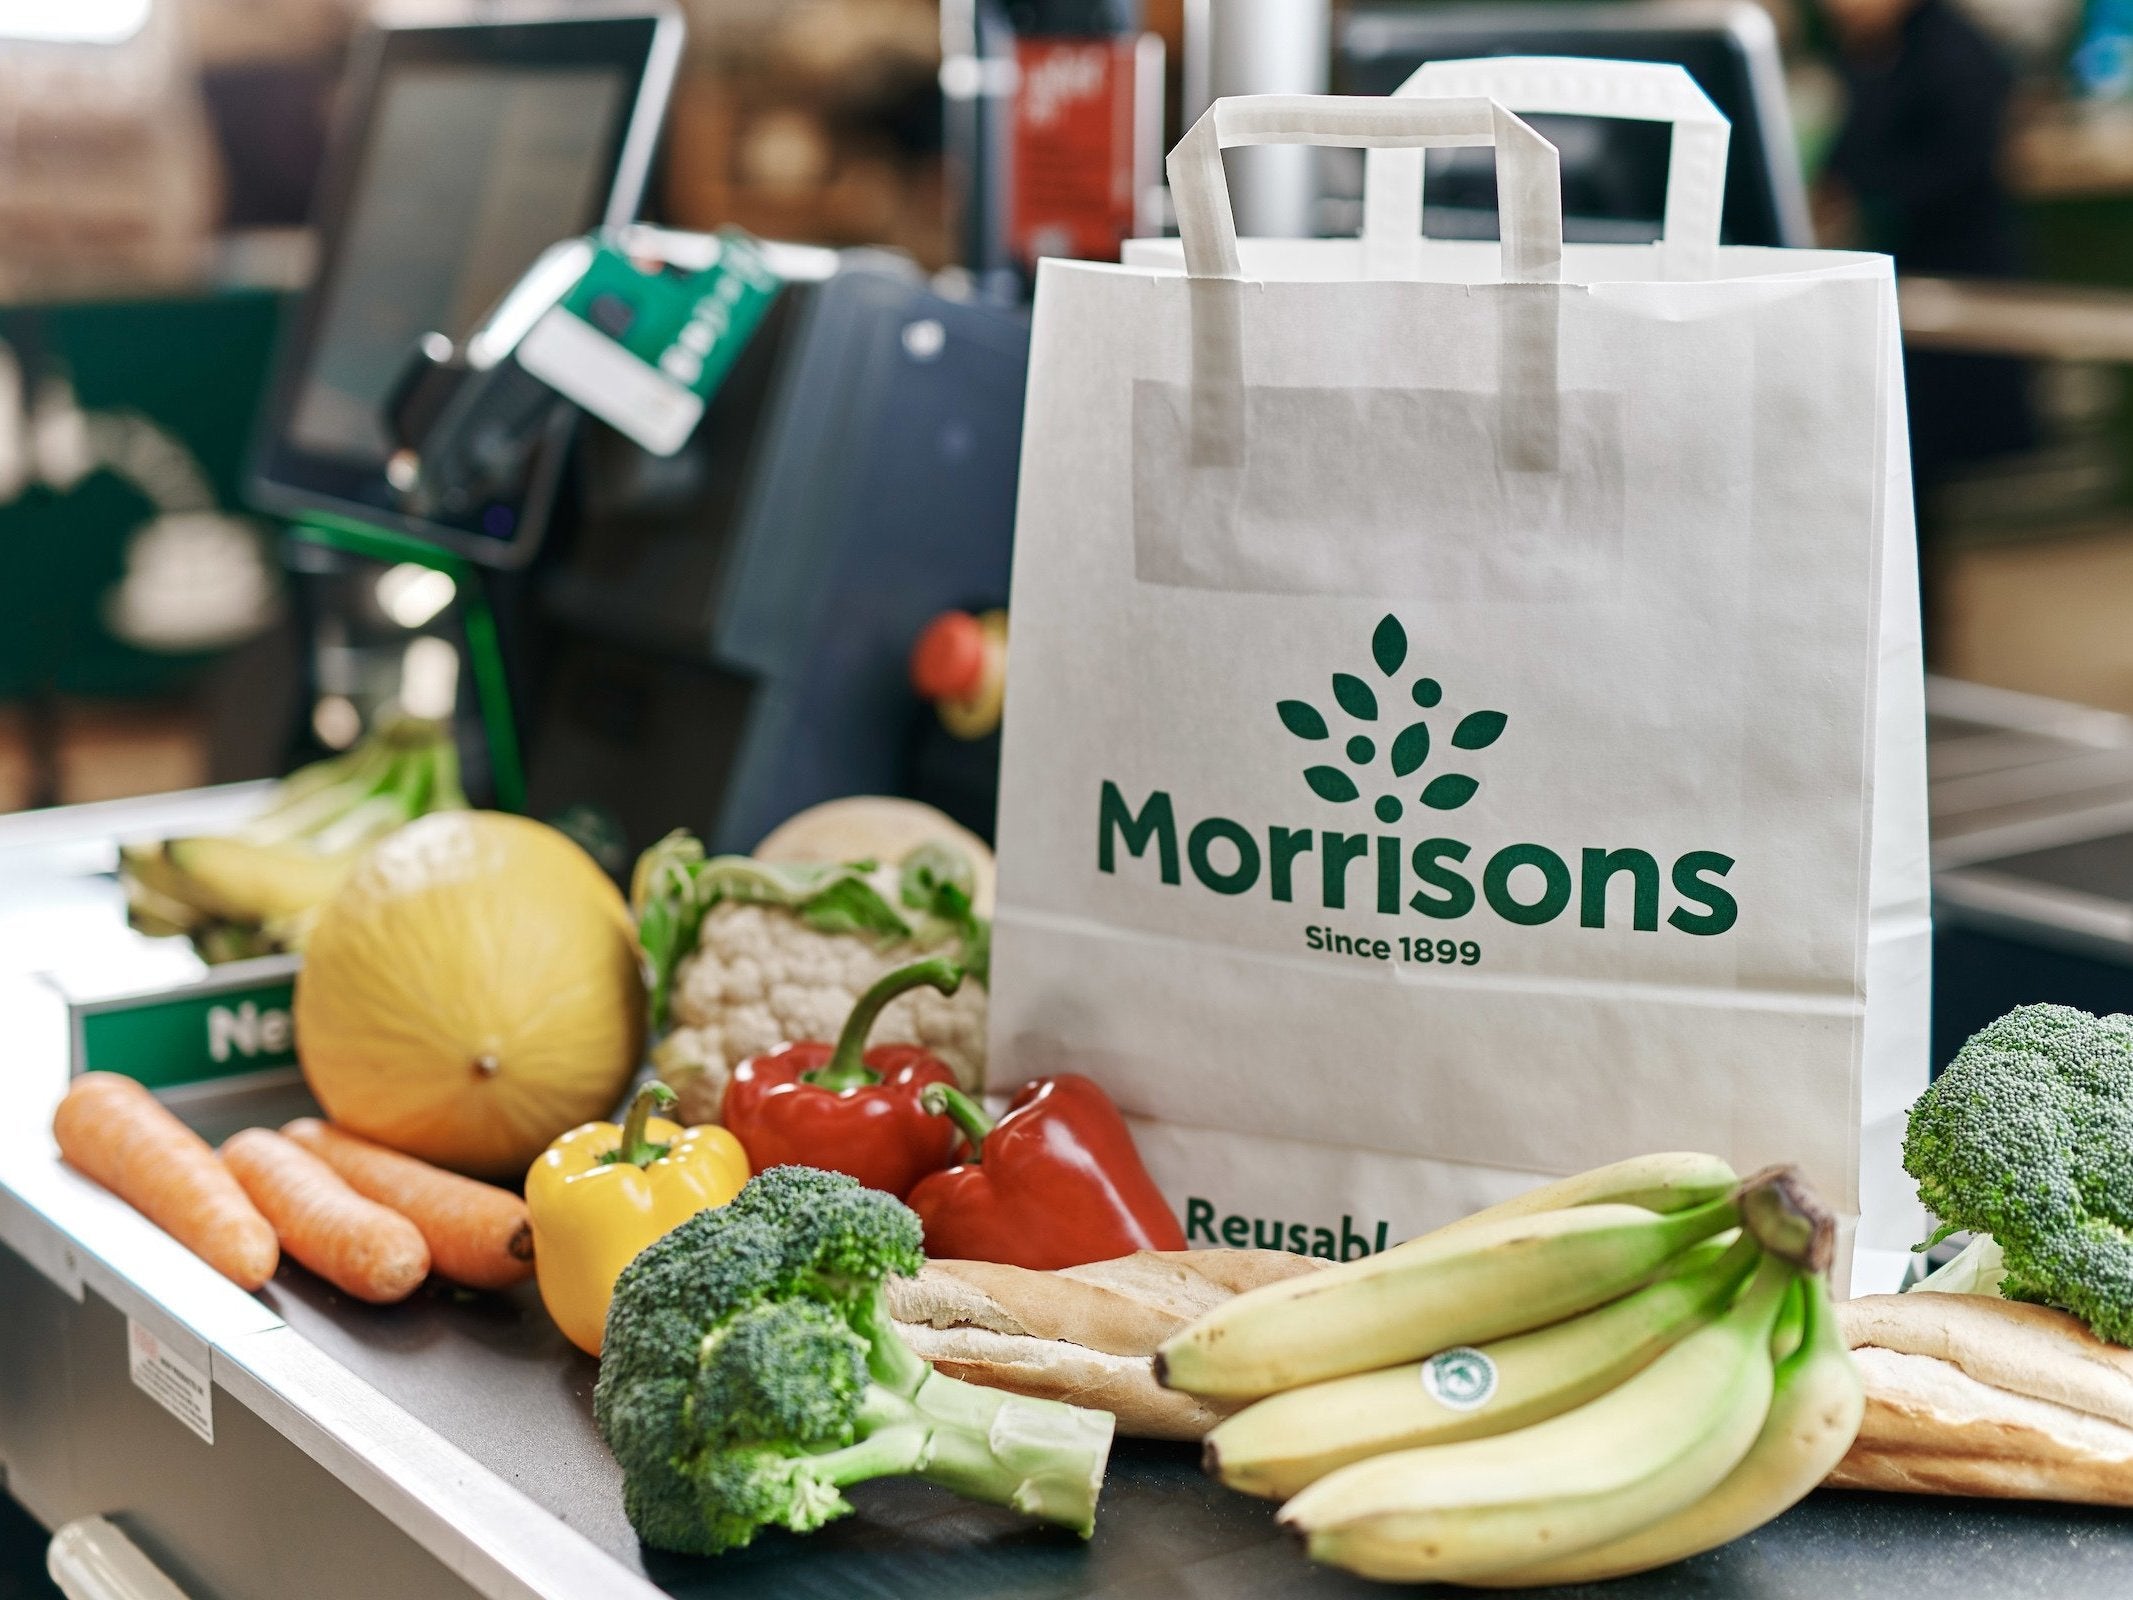 Morrisons is to sell 20p paper carrier bags in all its stores